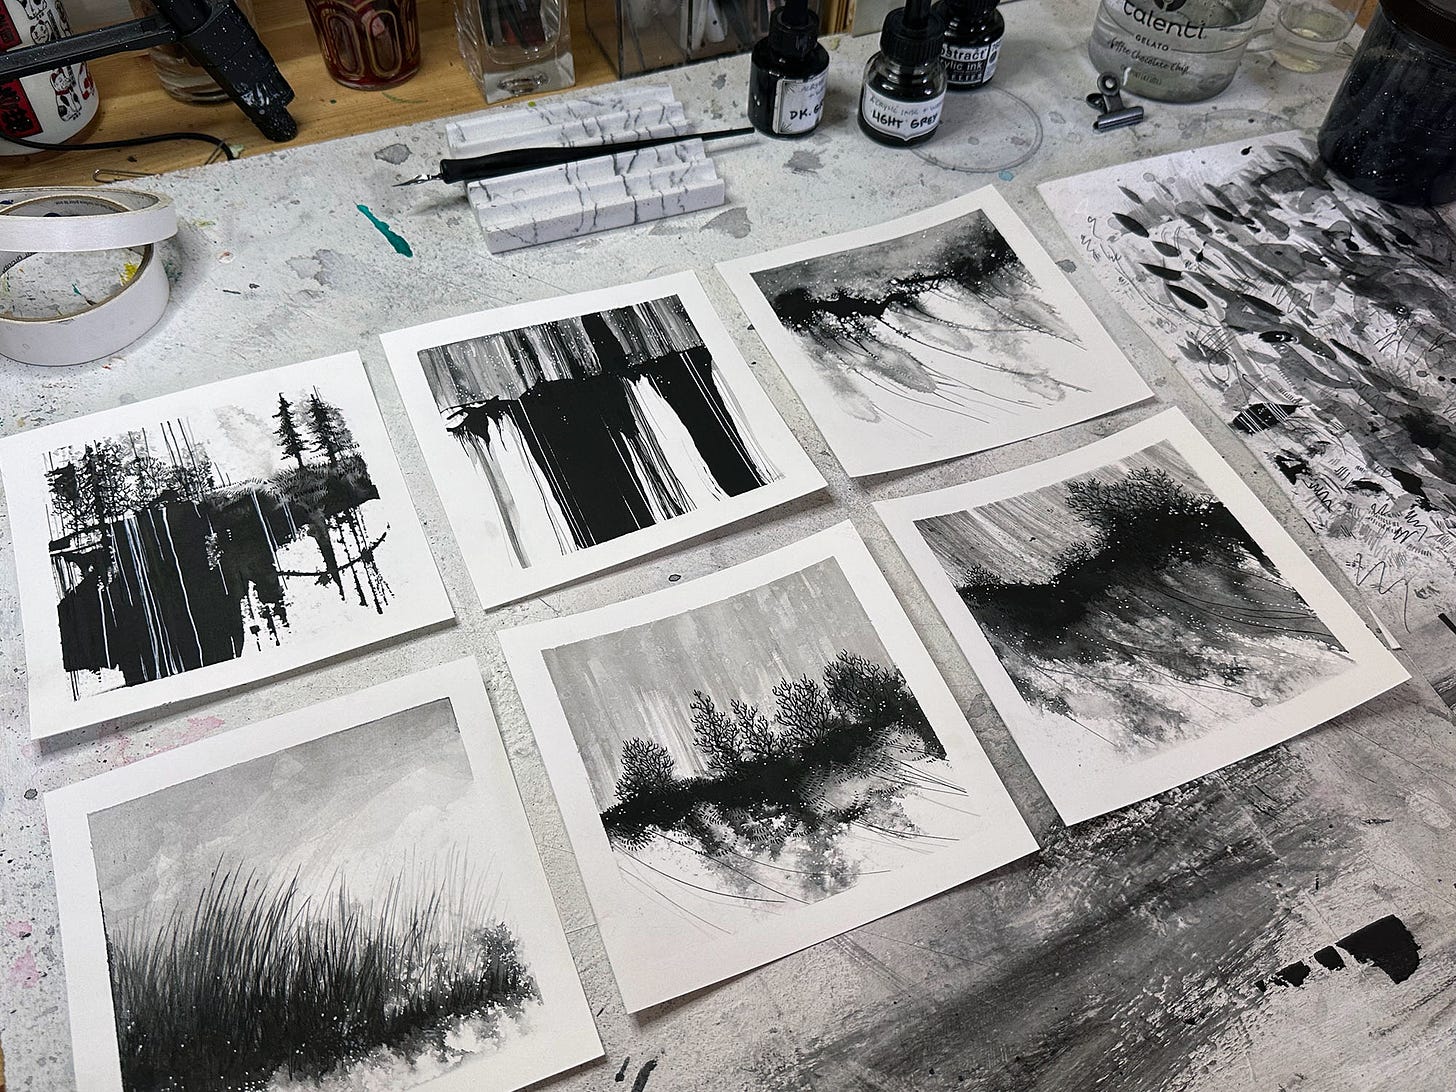 Photo of siz black and white ink paintings on my messy desk- the ppaintings are small, square, with white borders, and they are abstract landscapes in character- moody and atmospheric.